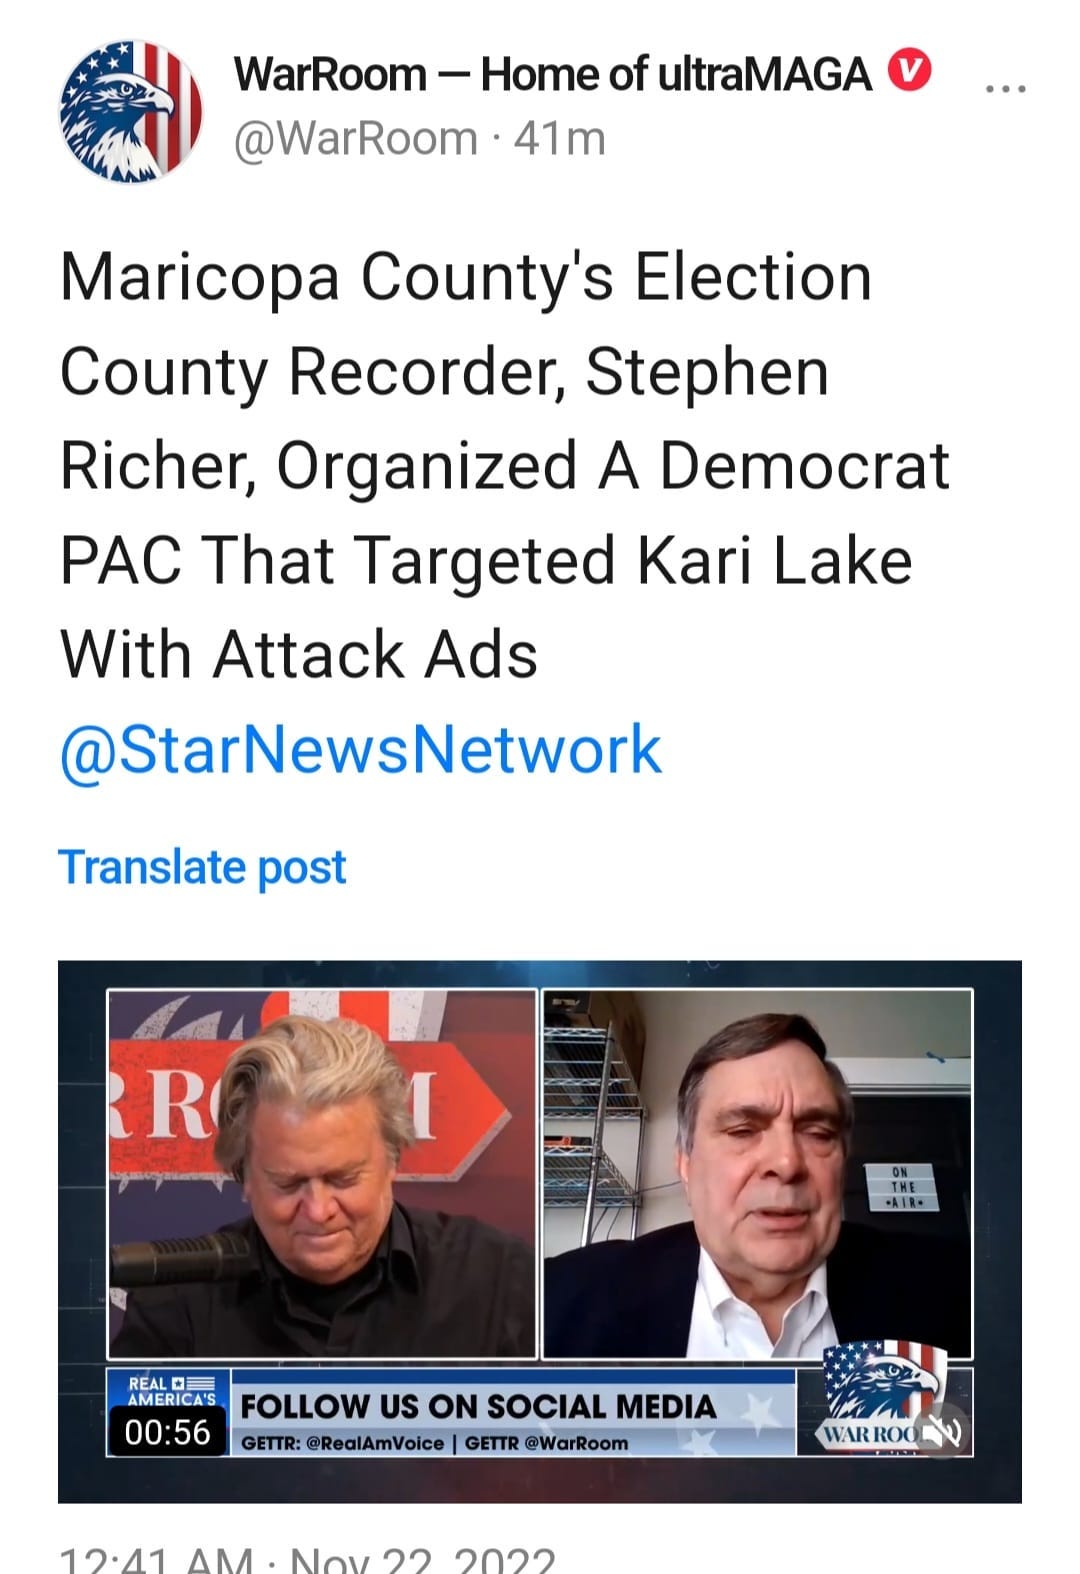 May be an image of 2 people and text that says 'WarRoom -Home of ultraMAGA @WarRoom 41m Maricopa County's Election County Recorder, Stephen Richer, Organized A Democrat PAC That Targeted Kari Lake With Attack Ads @StarNewsNetwork Translate post R REAL AMERICA'S 00:56 FOLLOW US ON SOCIAL MEDIA GETTR: @RealAmVoice GETTR @WarRoom 12:11 AM WAR ROO 2022'